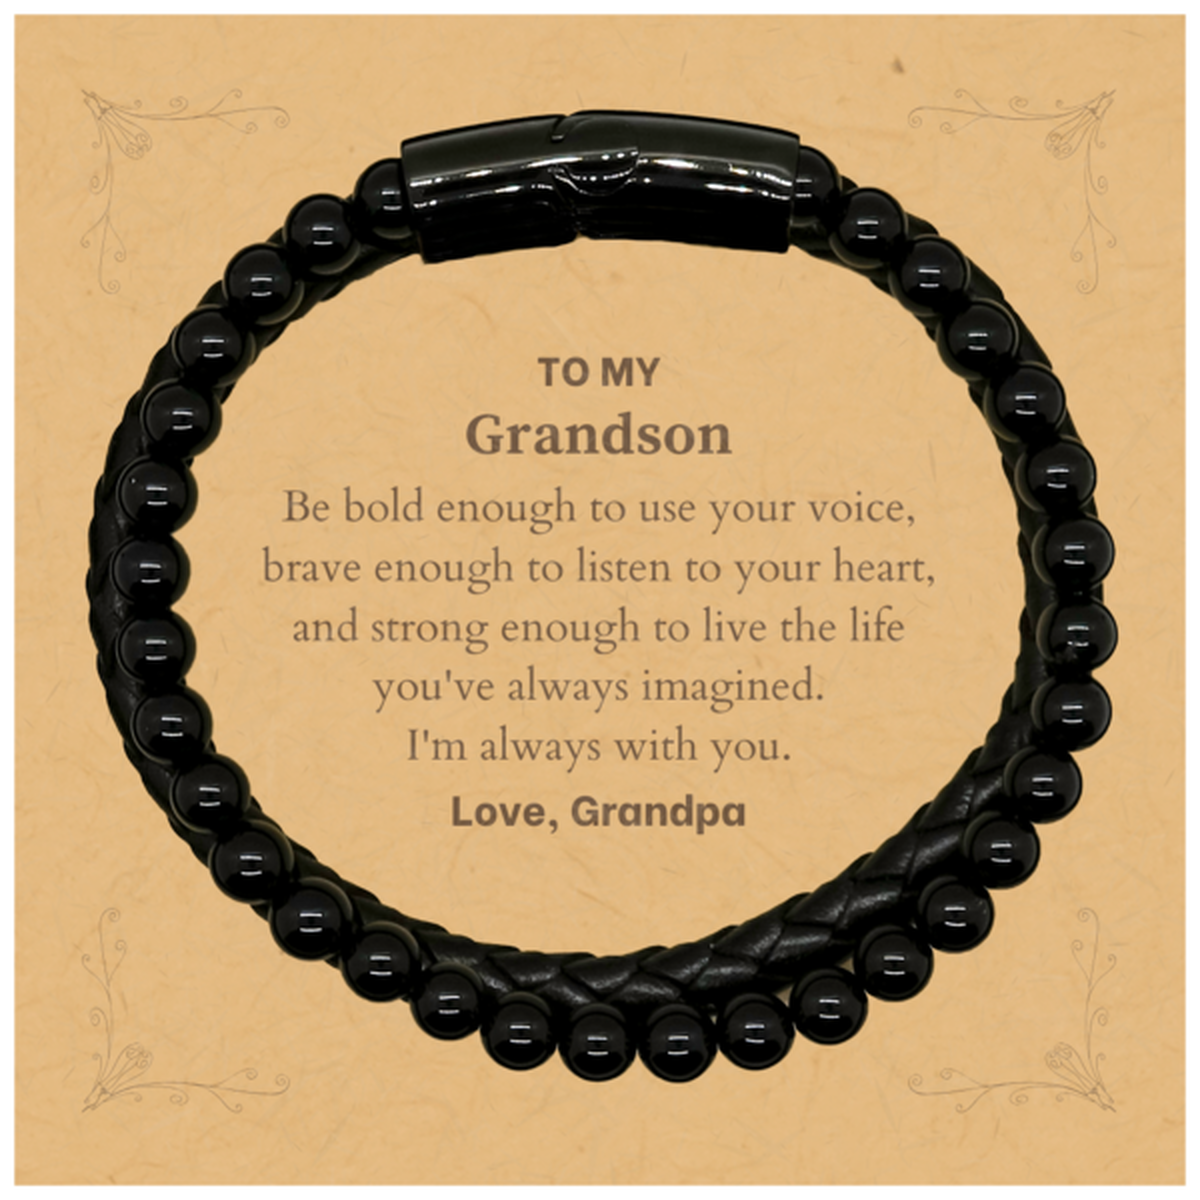 Keepsake Grandson Stone Leather Bracelets Gift Idea Graduation Christmas Birthday Grandson from Grandpa, Grandson Be bold enough to use your voice, brave enough to listen to your heart. Love, Grandpa